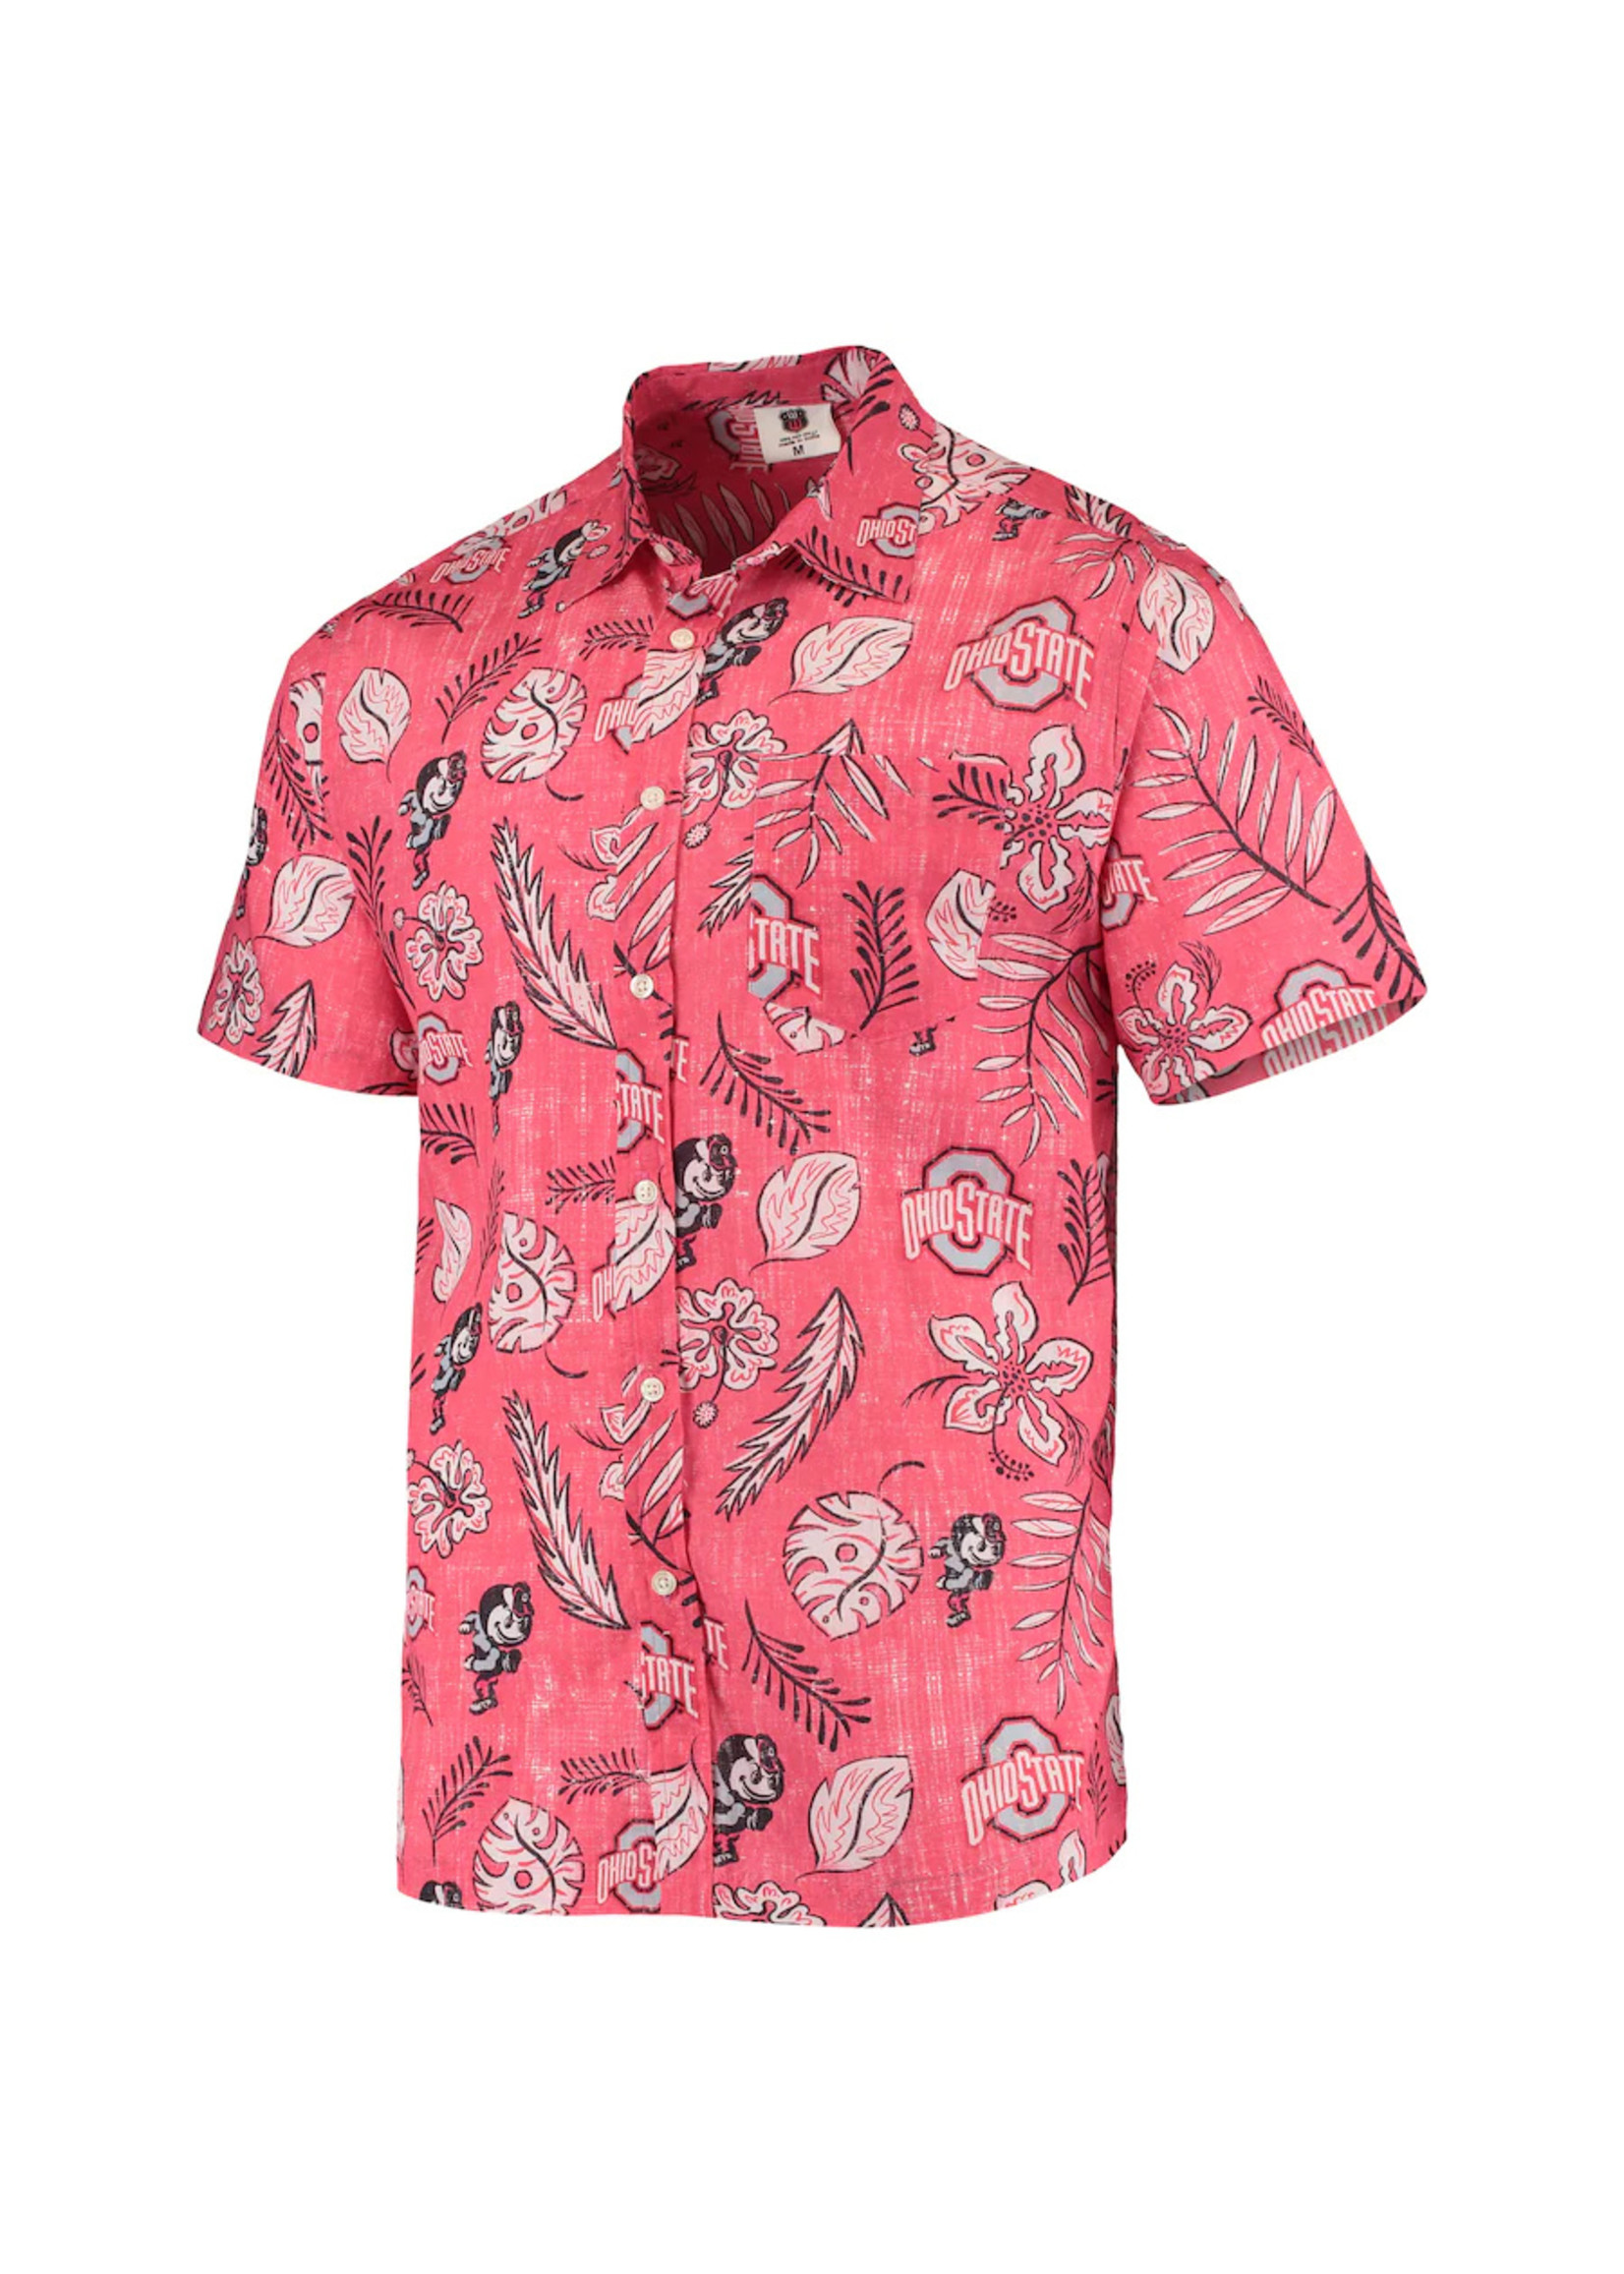 Ohio State Buckeyes Vintage Floral Button-Down Shirt